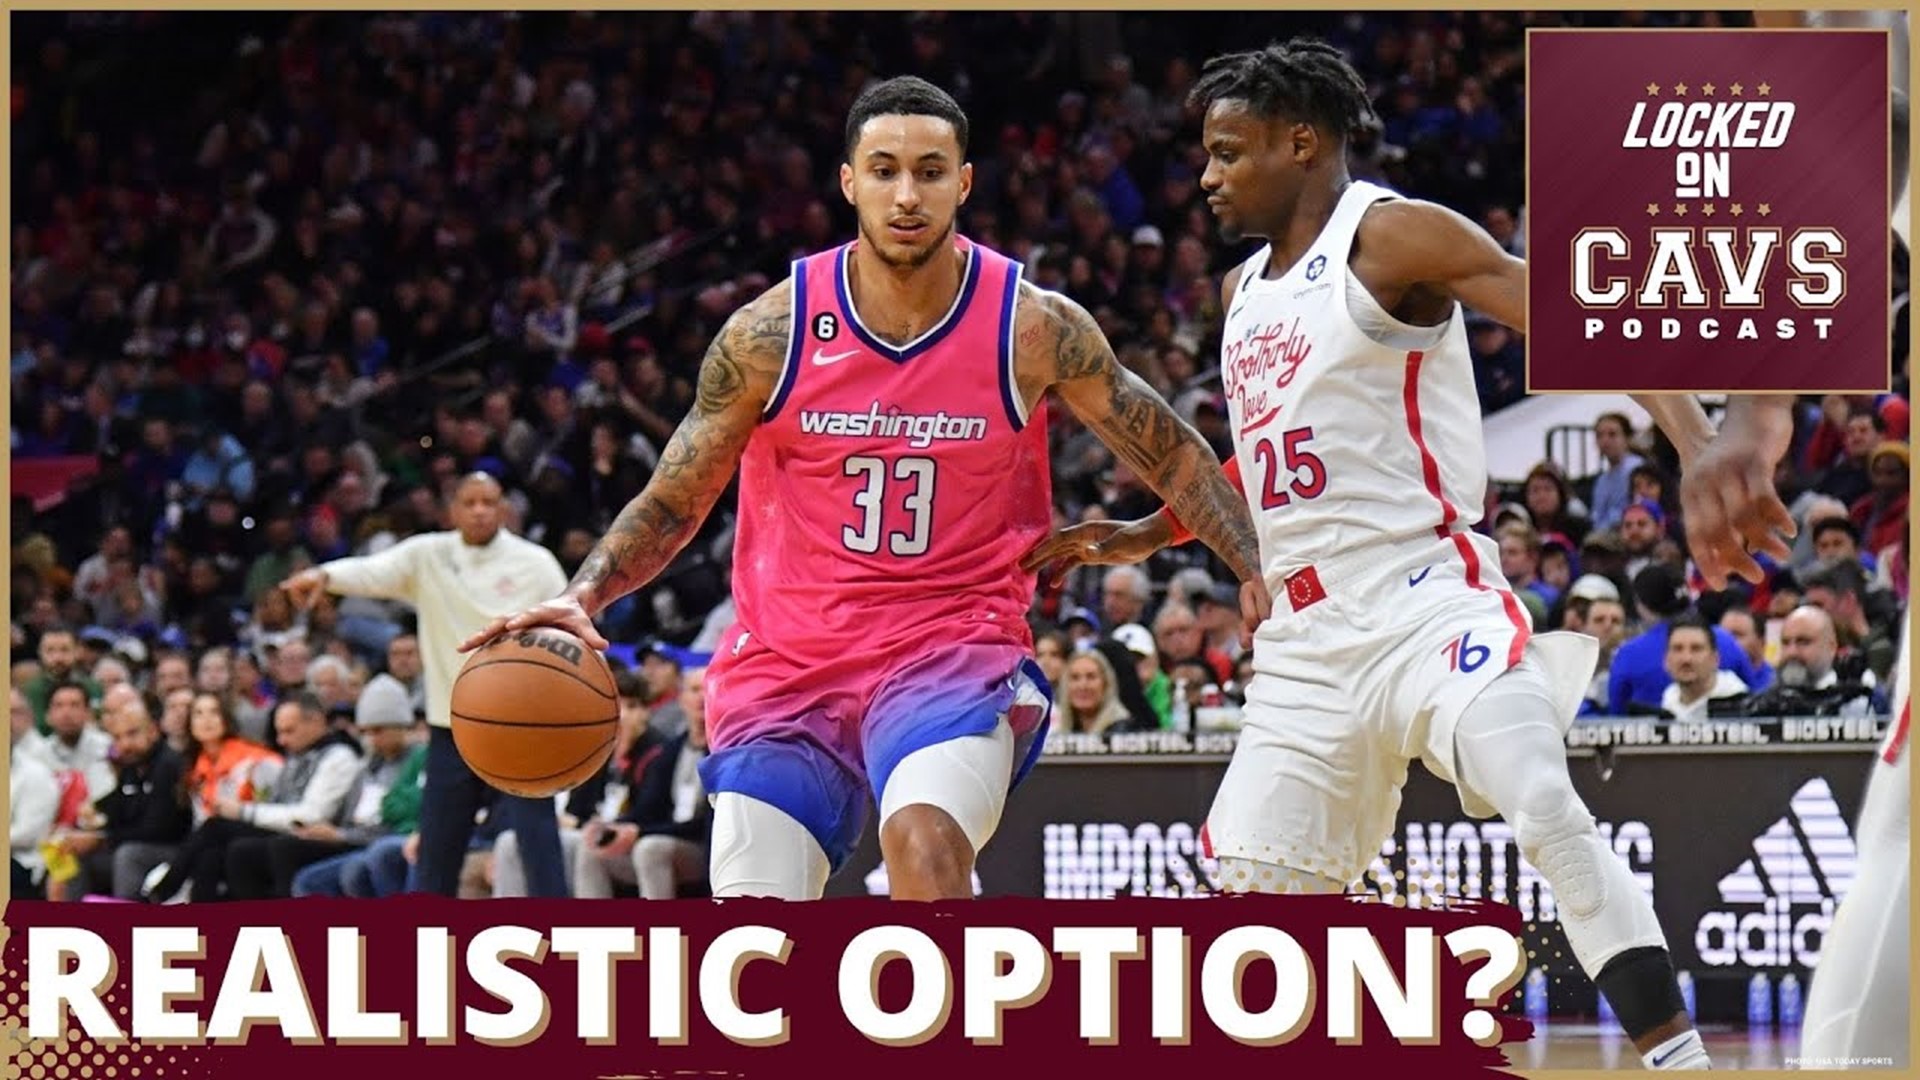 5 players to watch entering 2023 NBA free agency - Sactown Sports